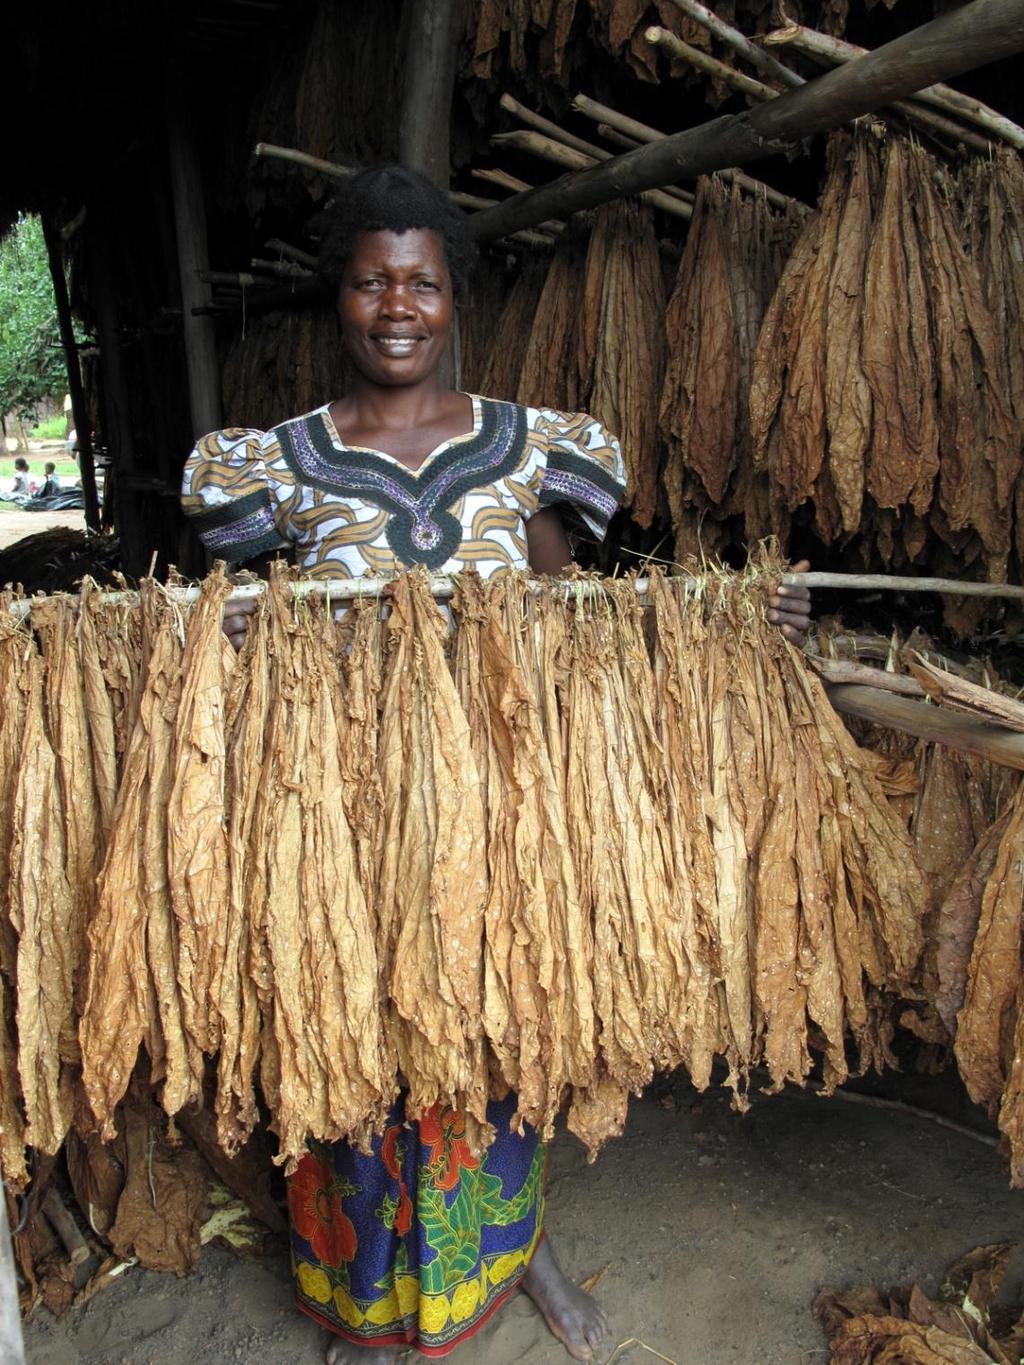 Sample 3,150 tobacco farmers currently borrowing from a Malawian MFI ~300 borrowing clubs with group liability loans Sell crop to central